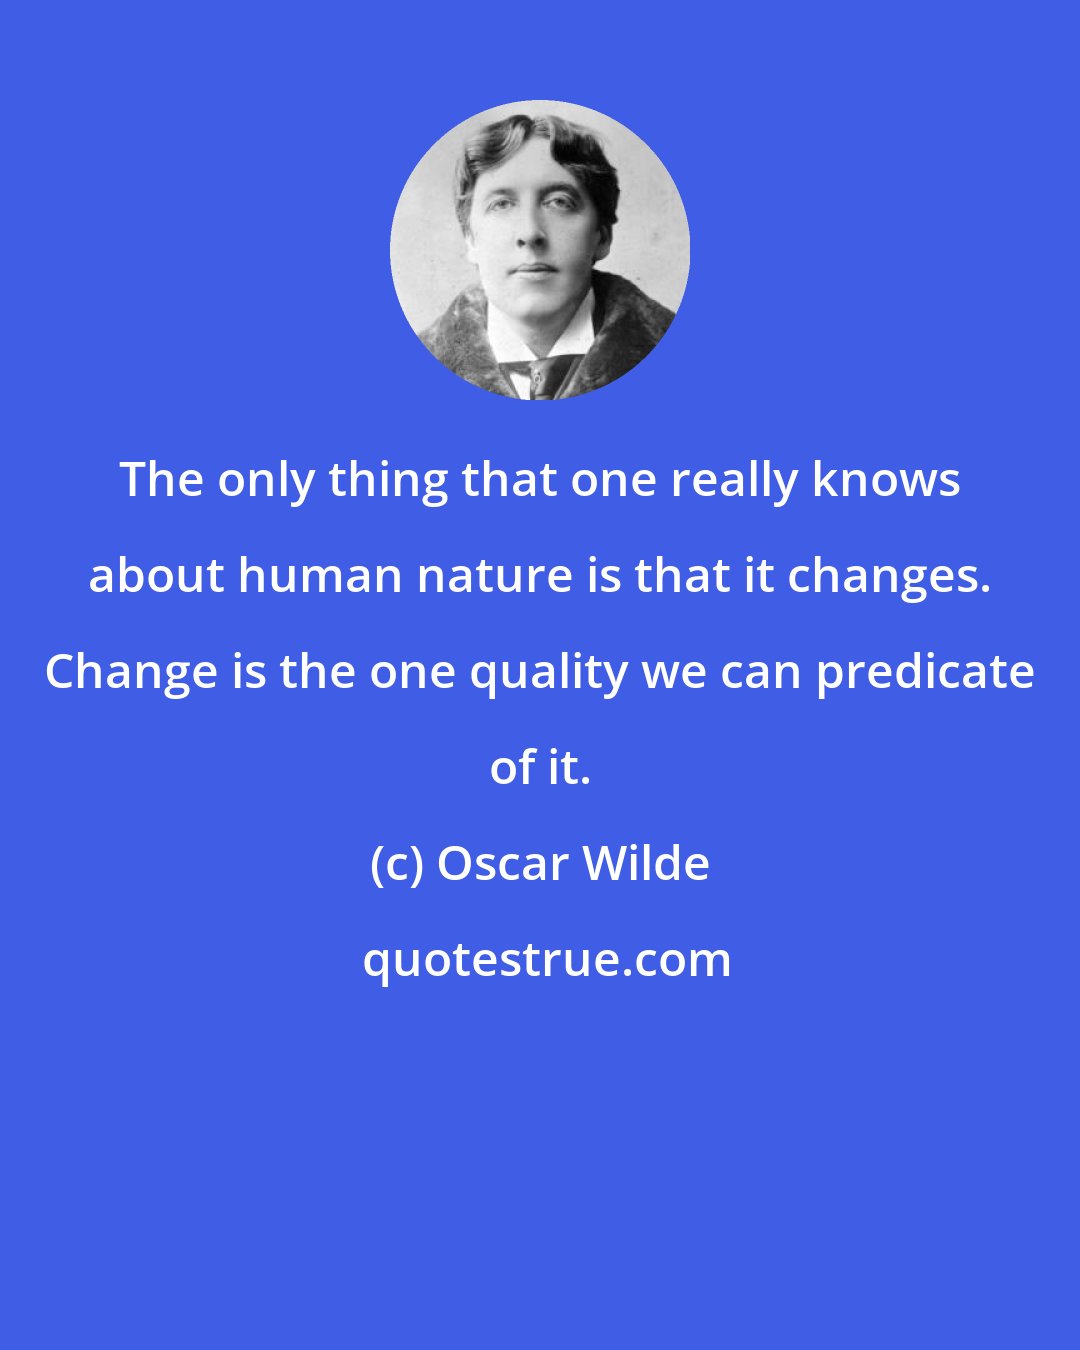 Oscar Wilde: The only thing that one really knows about human nature is that it changes. Change is the one quality we can predicate of it.